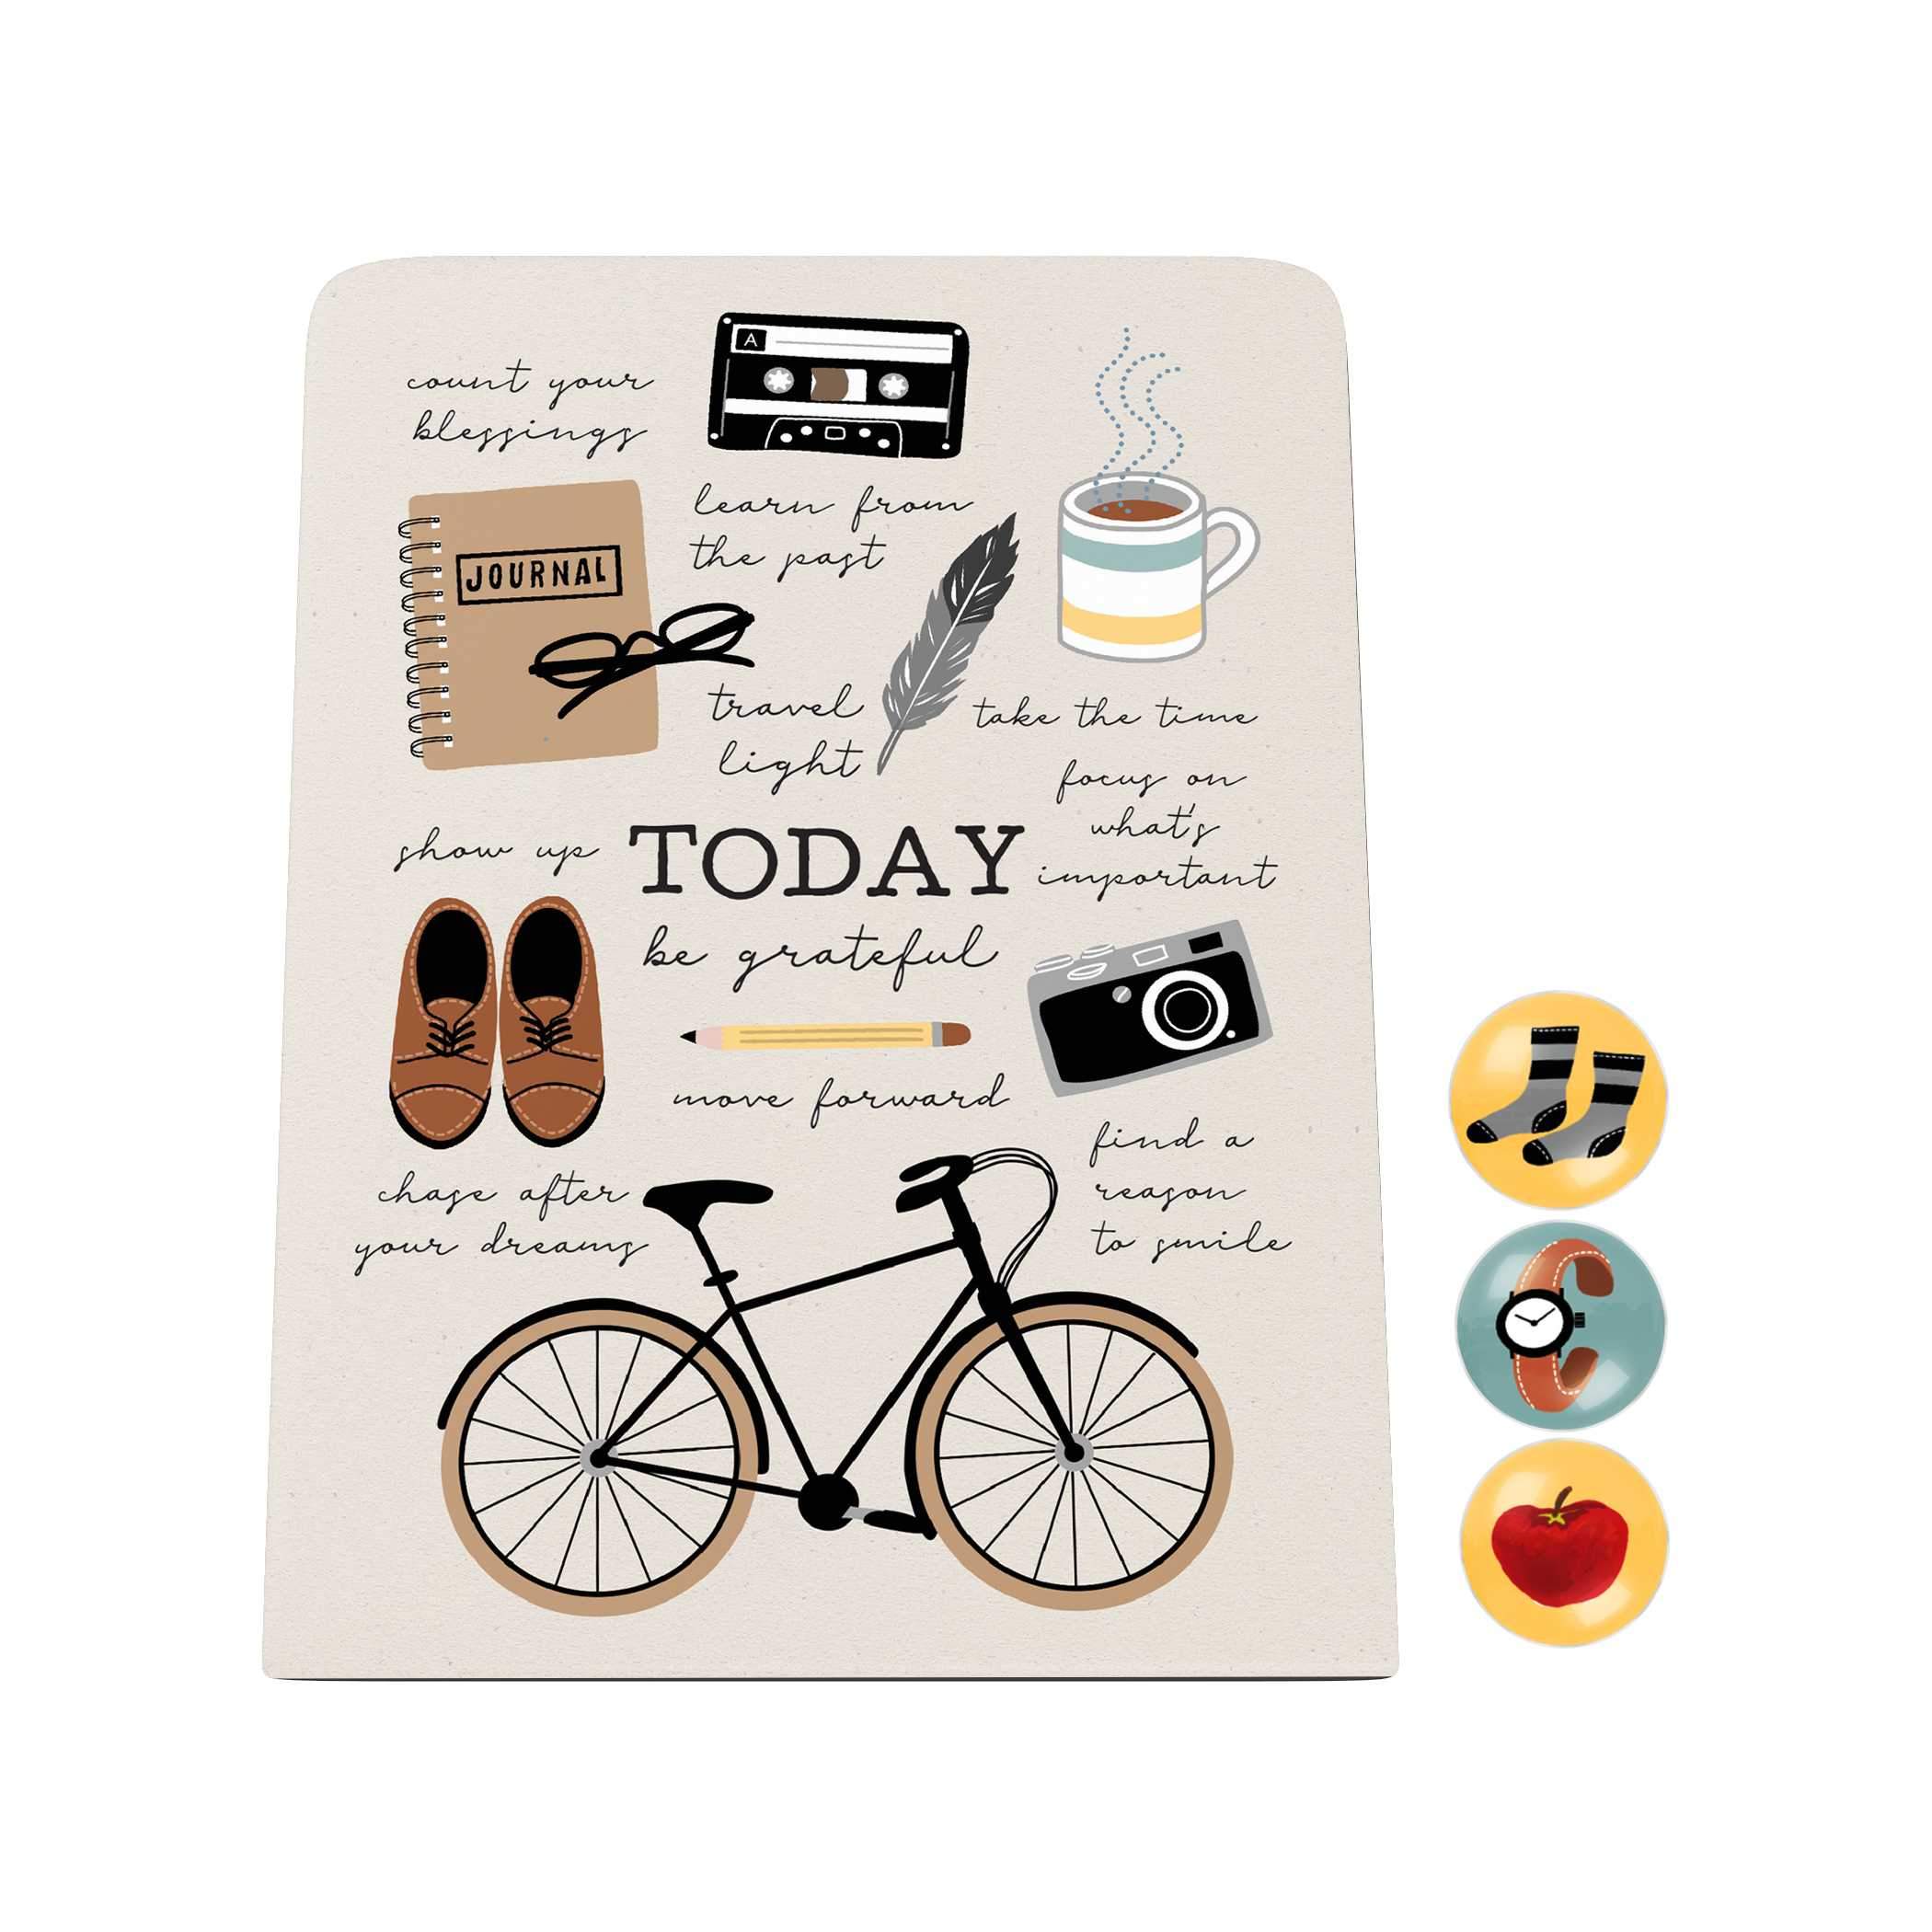 Everyday Things Desk Magnet Board: Today Be Grateful